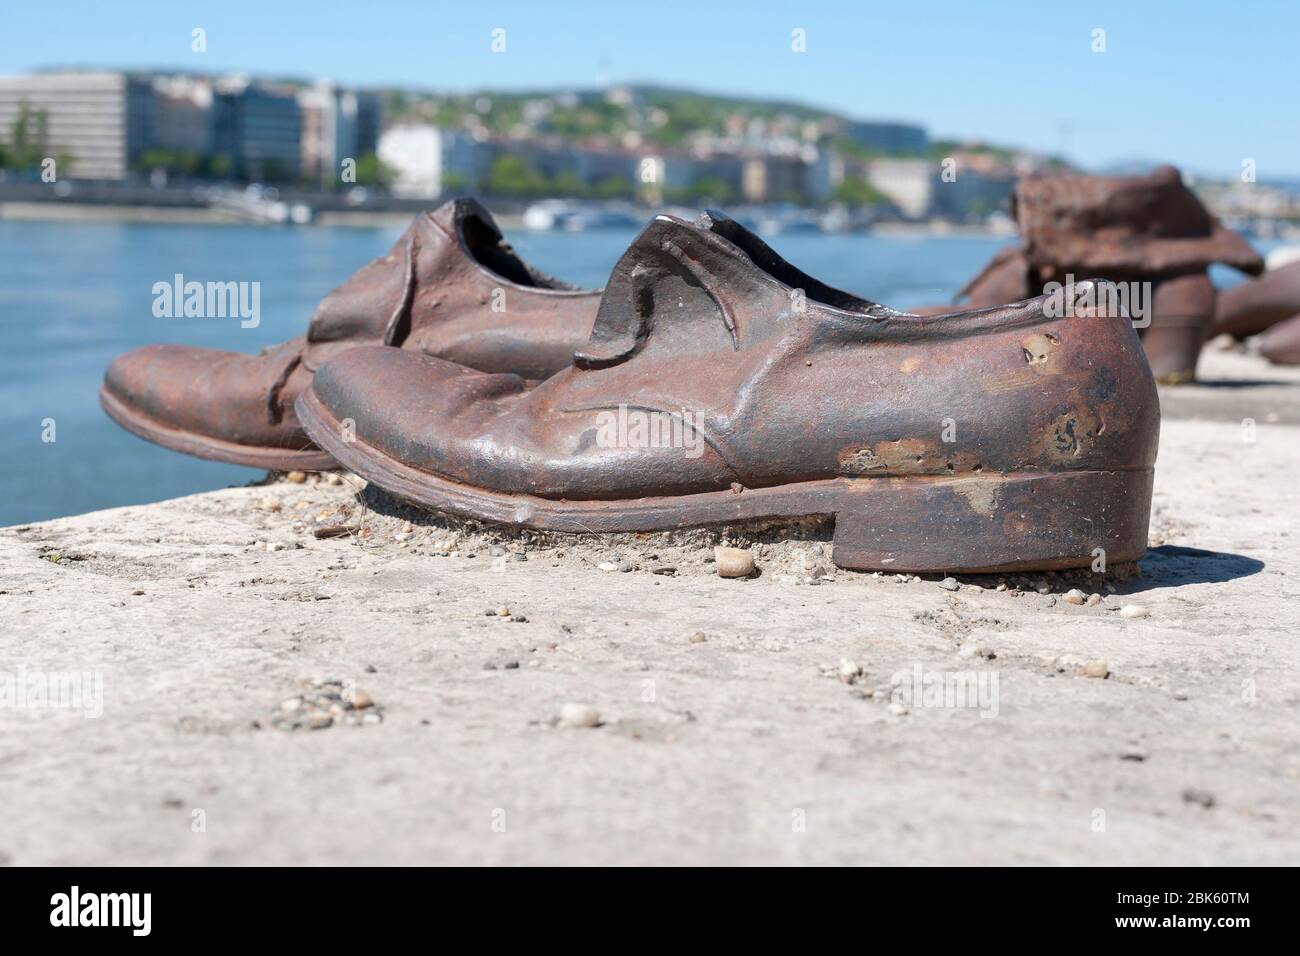 BUDAPEST, HUNGARY - APRIL 01, 2020: Iron shoes memorial to Jewish people executed WW2 in Budapest on the Danube Bank Stock Photo